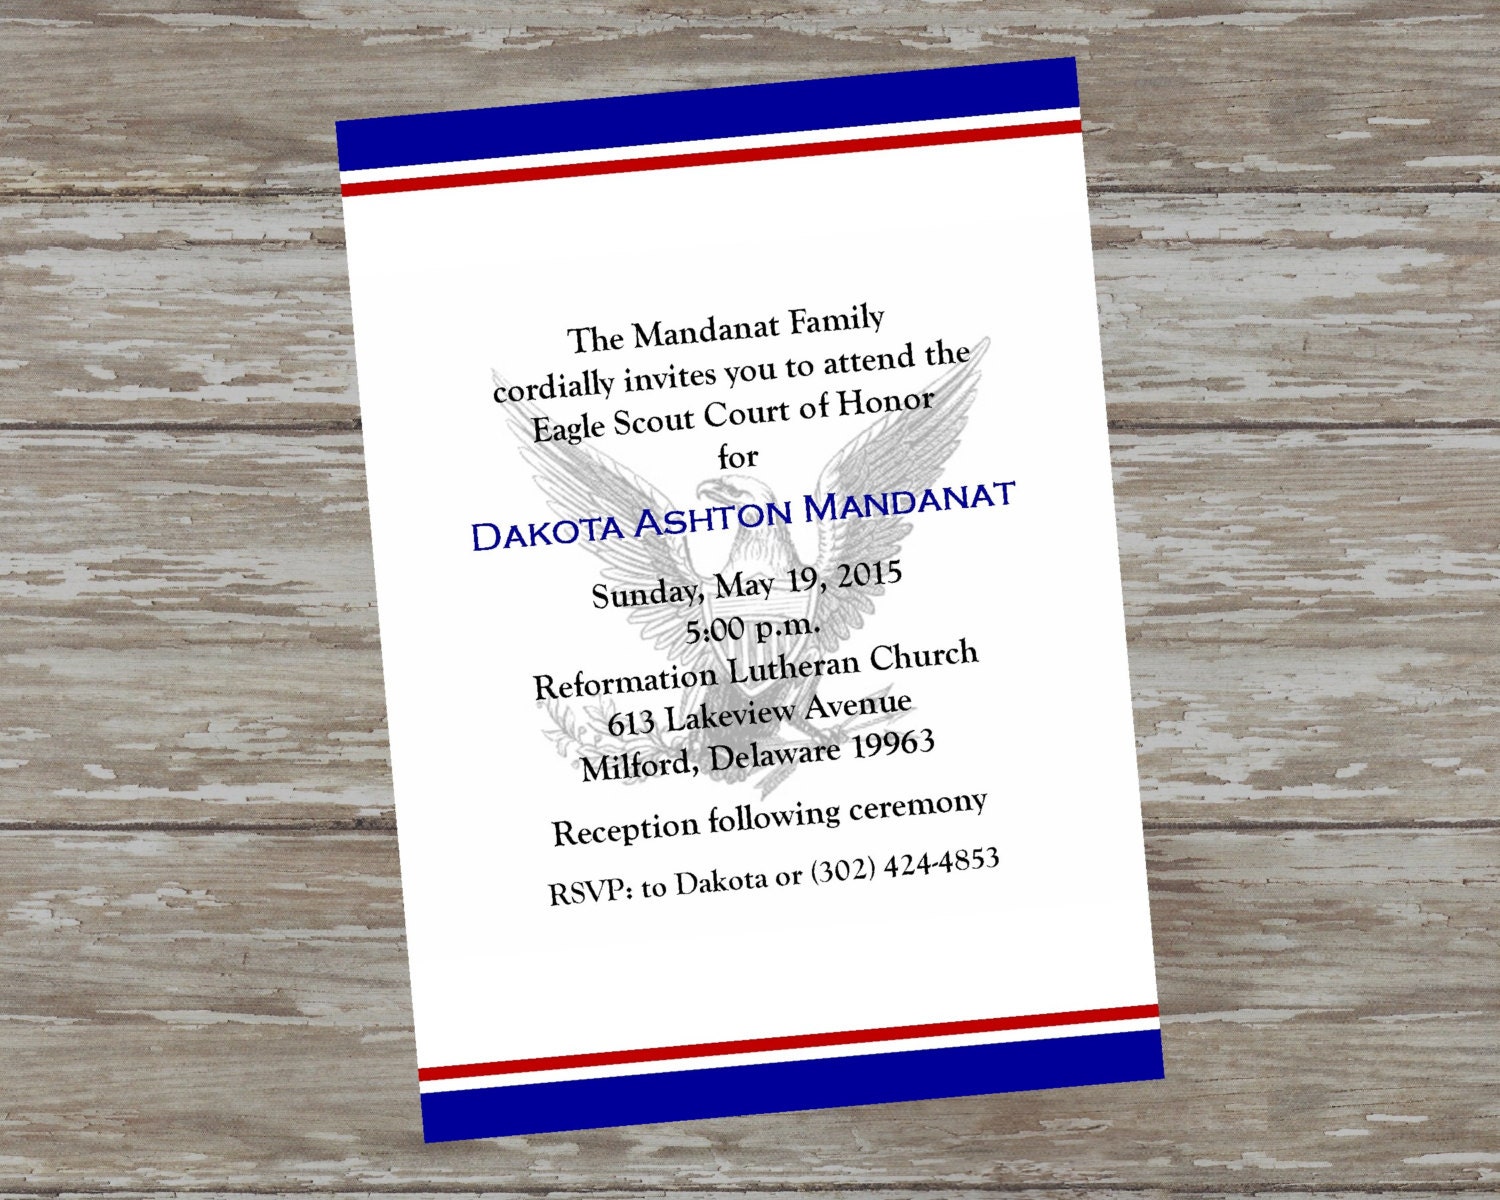 Eagle Scout Court of Honor Invitations by ItsAllAboutTheCards